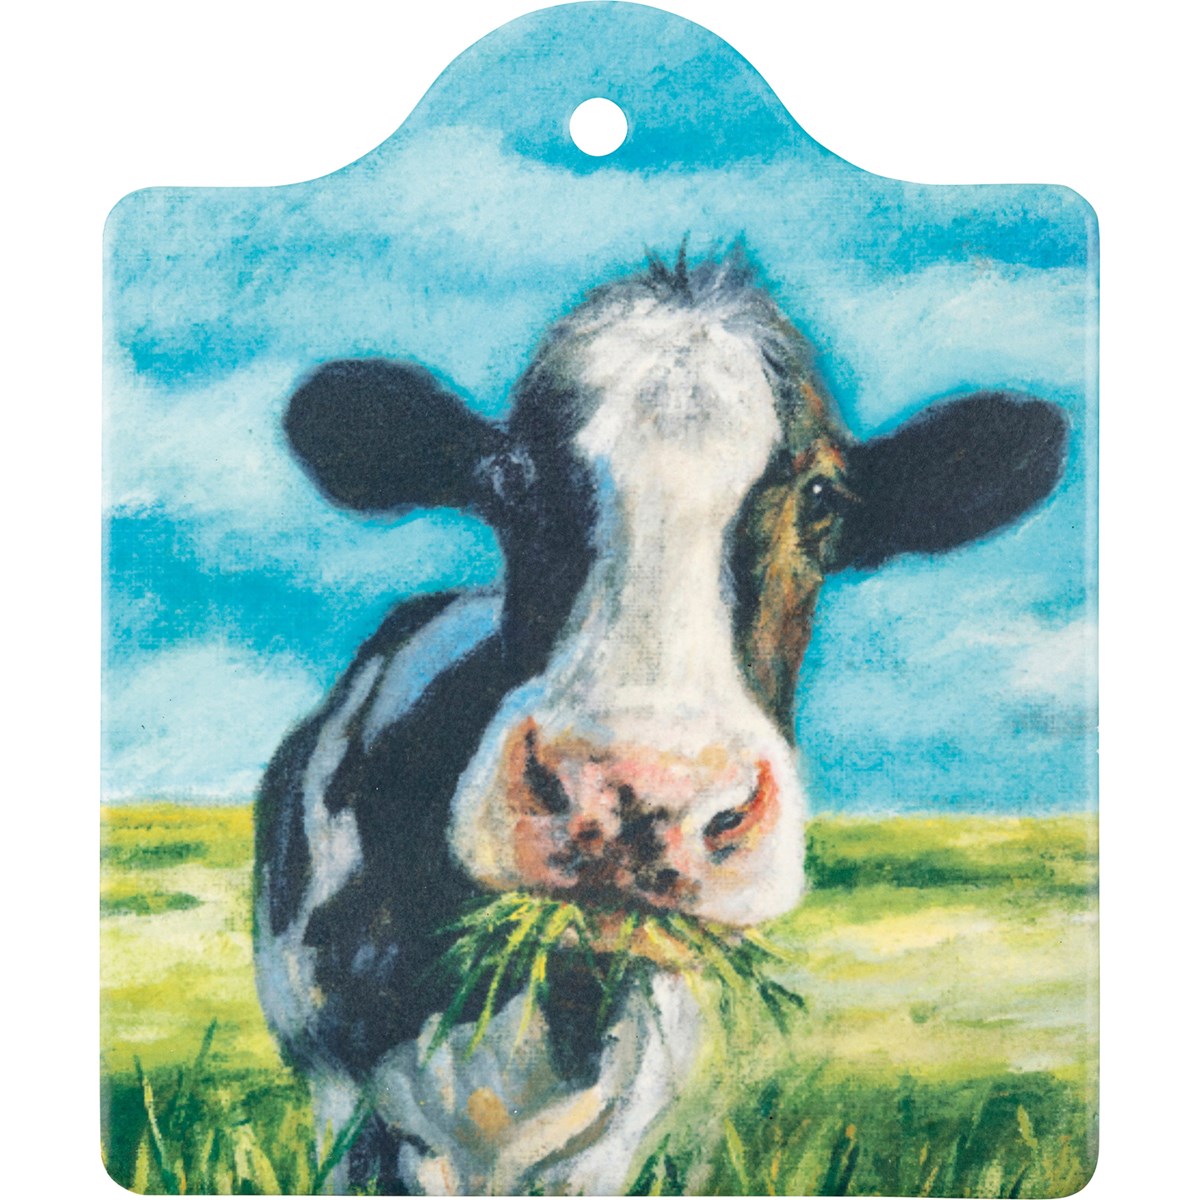 Cow With A Mouthful Trivet - Stone, Cork